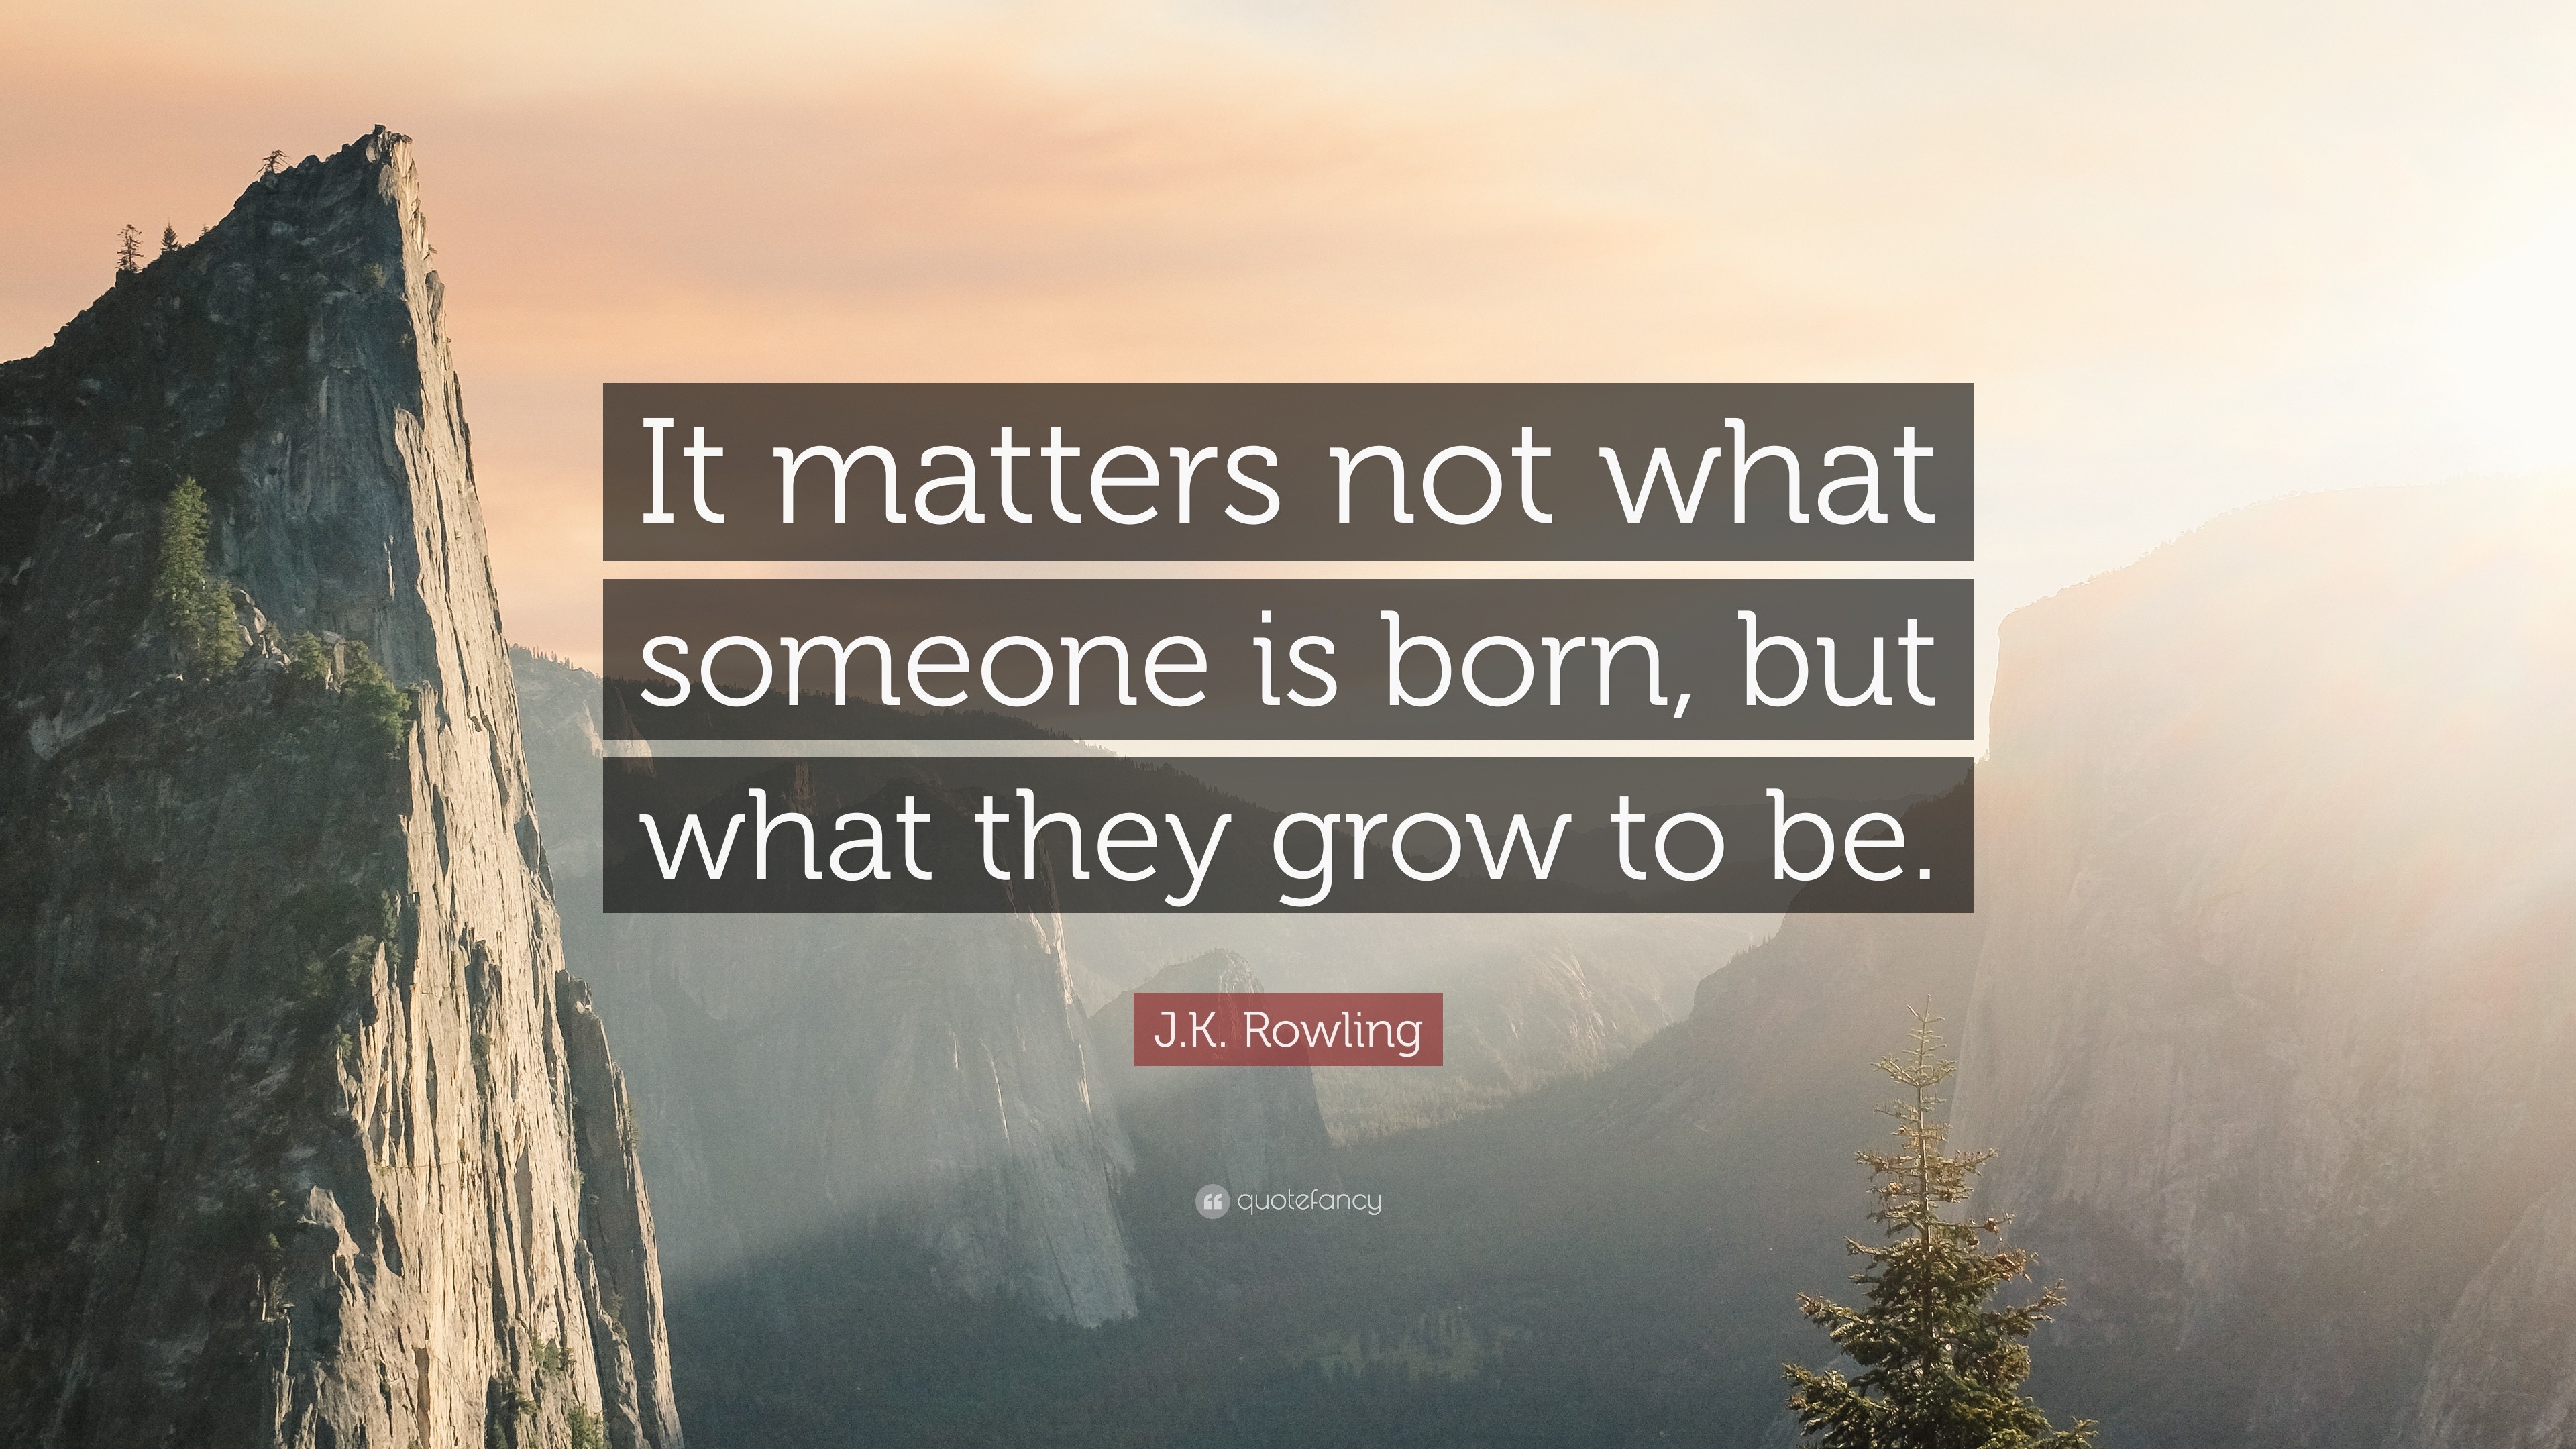 J.K. Rowling Quote: “It matters not what someone is born, but what they